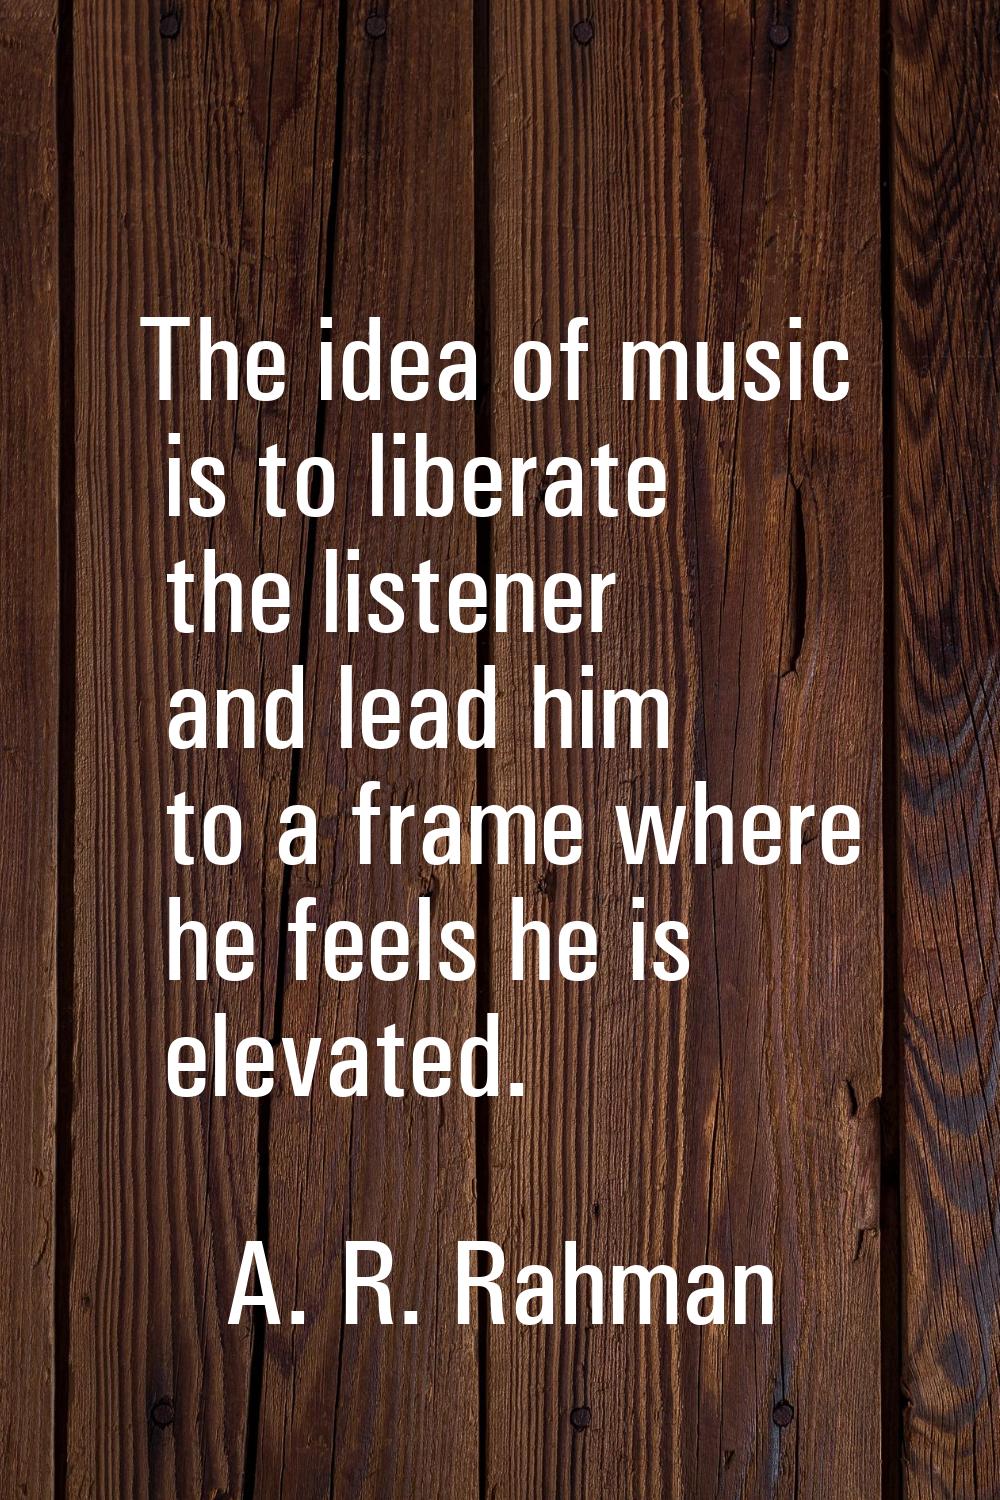 The idea of music is to liberate the listener and lead him to a frame where he feels he is elevated